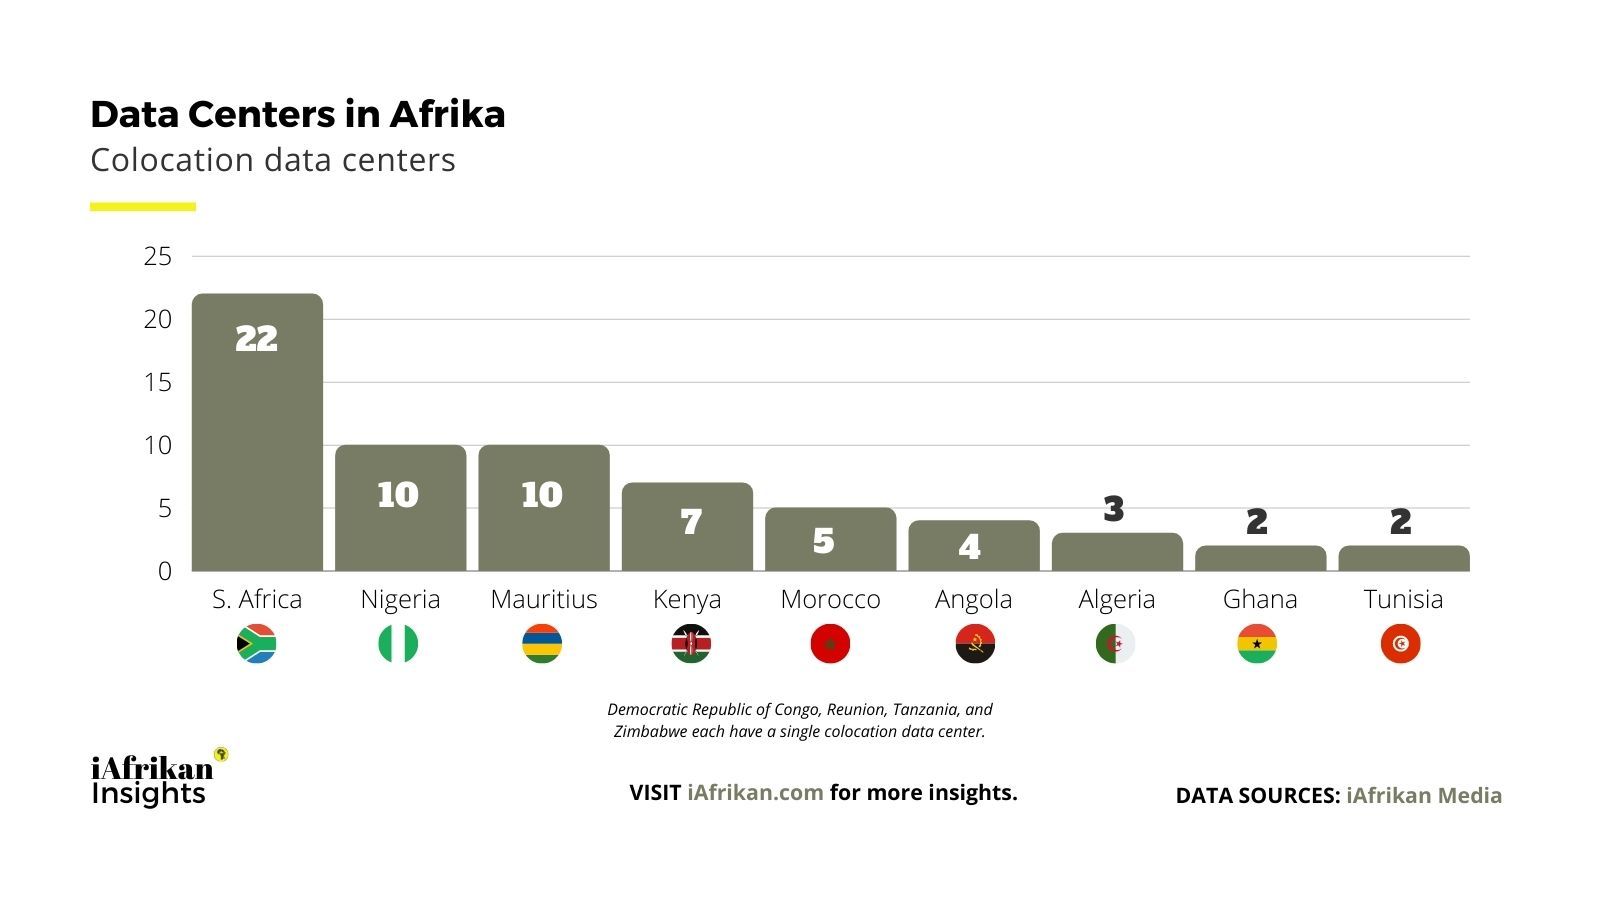 South Africa leads the African continent with 22 colocation data centers, followed by Nigeria (10), Mauritius (10), Kenya (7), Morocco (5), Angola (4), Algeria (3), Ghana (2), and Tunisia (2) as of 2021.